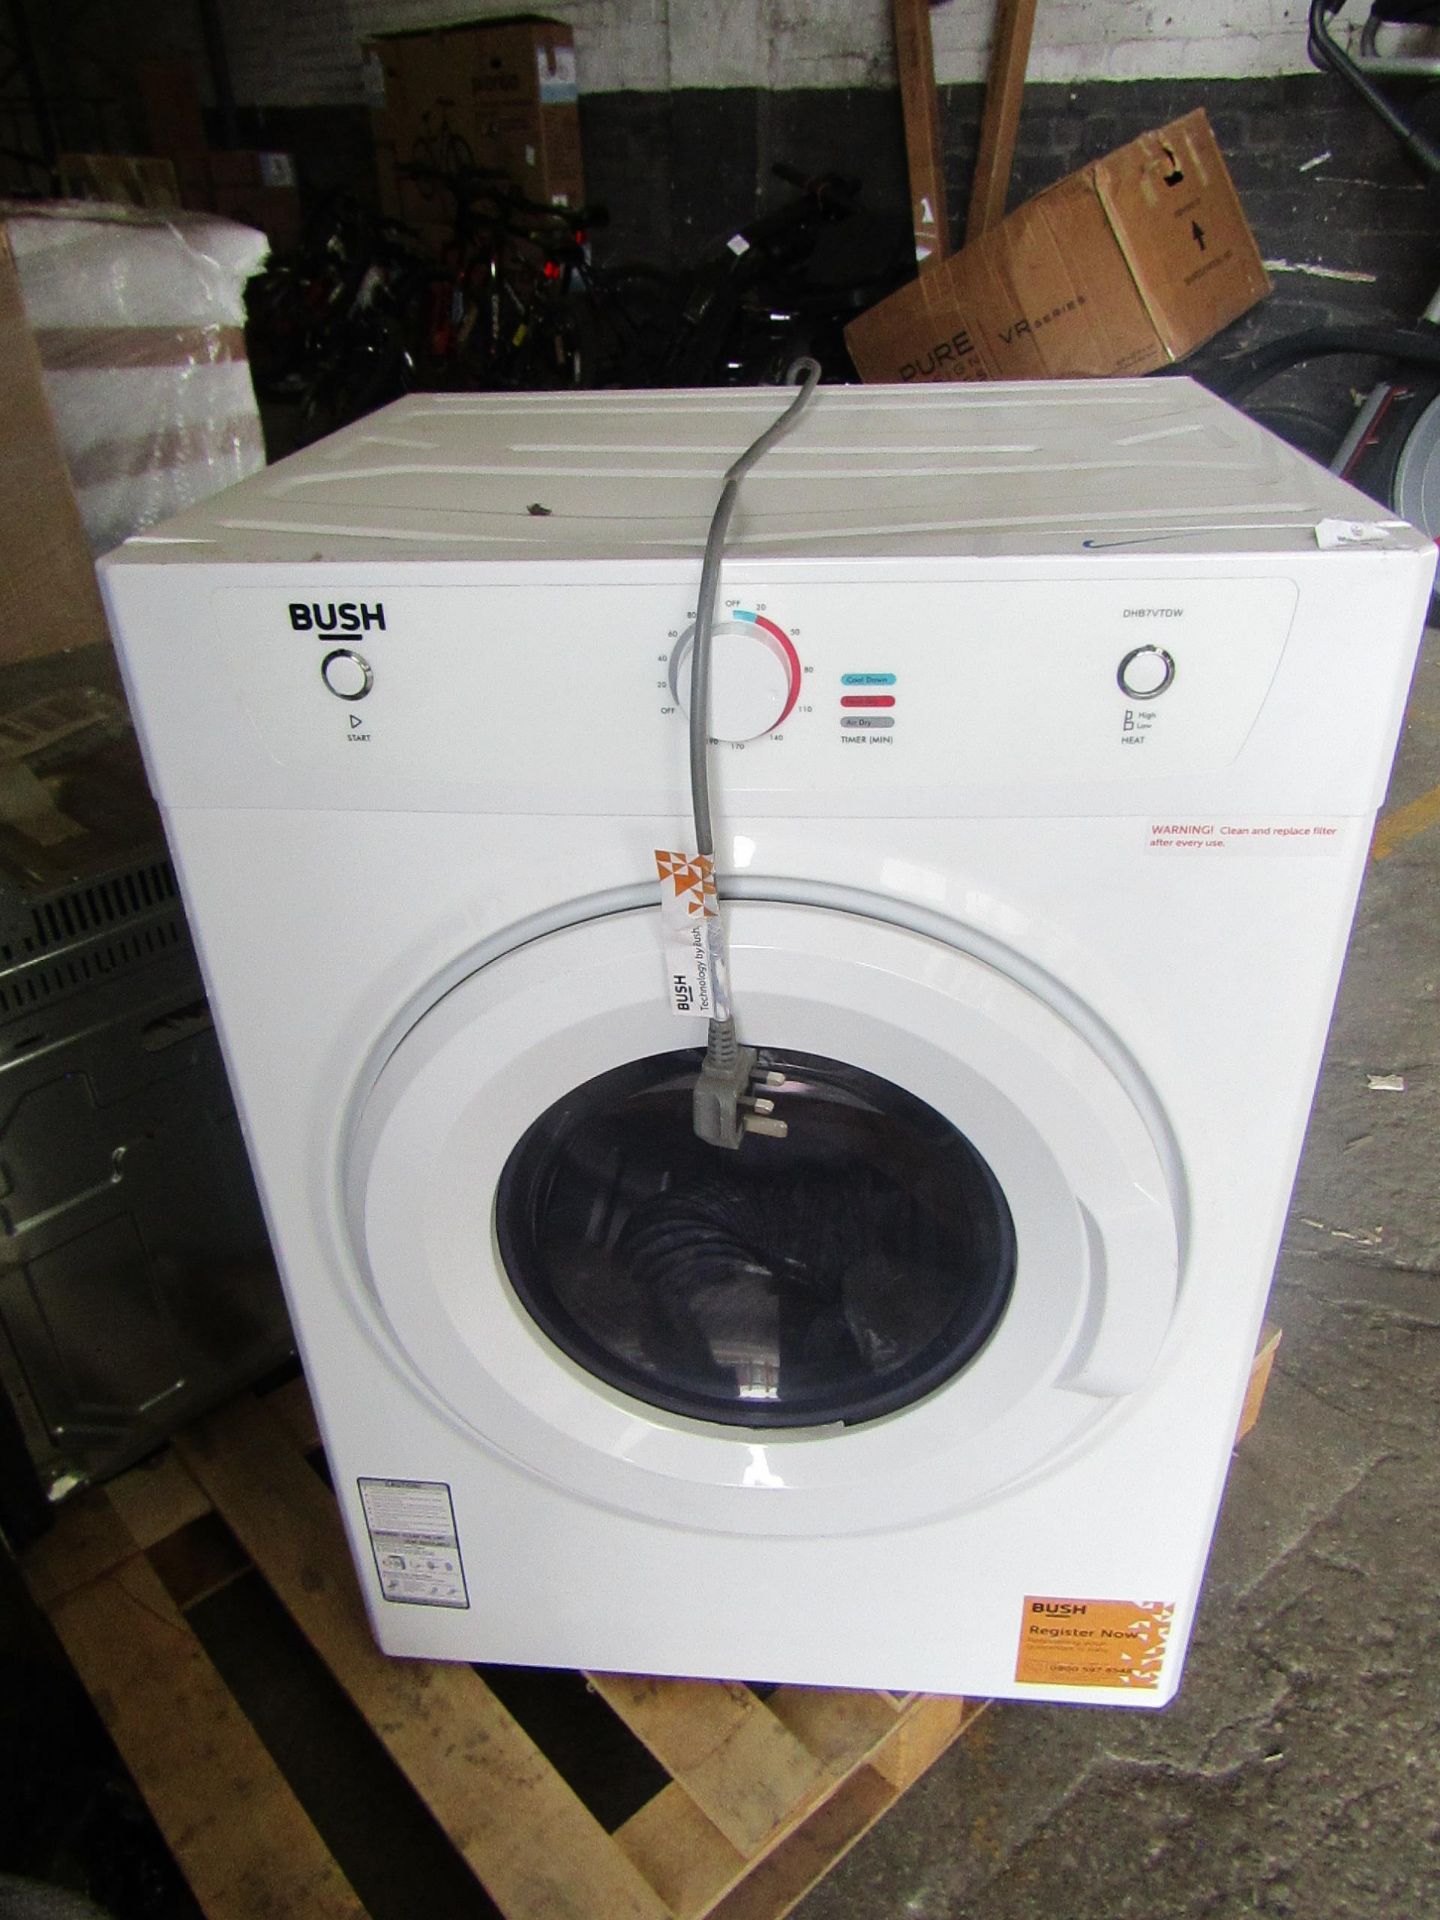 BUSH Vented Tumble Dryer DHB7VTDW RRP ?170.00, tested and working for heat